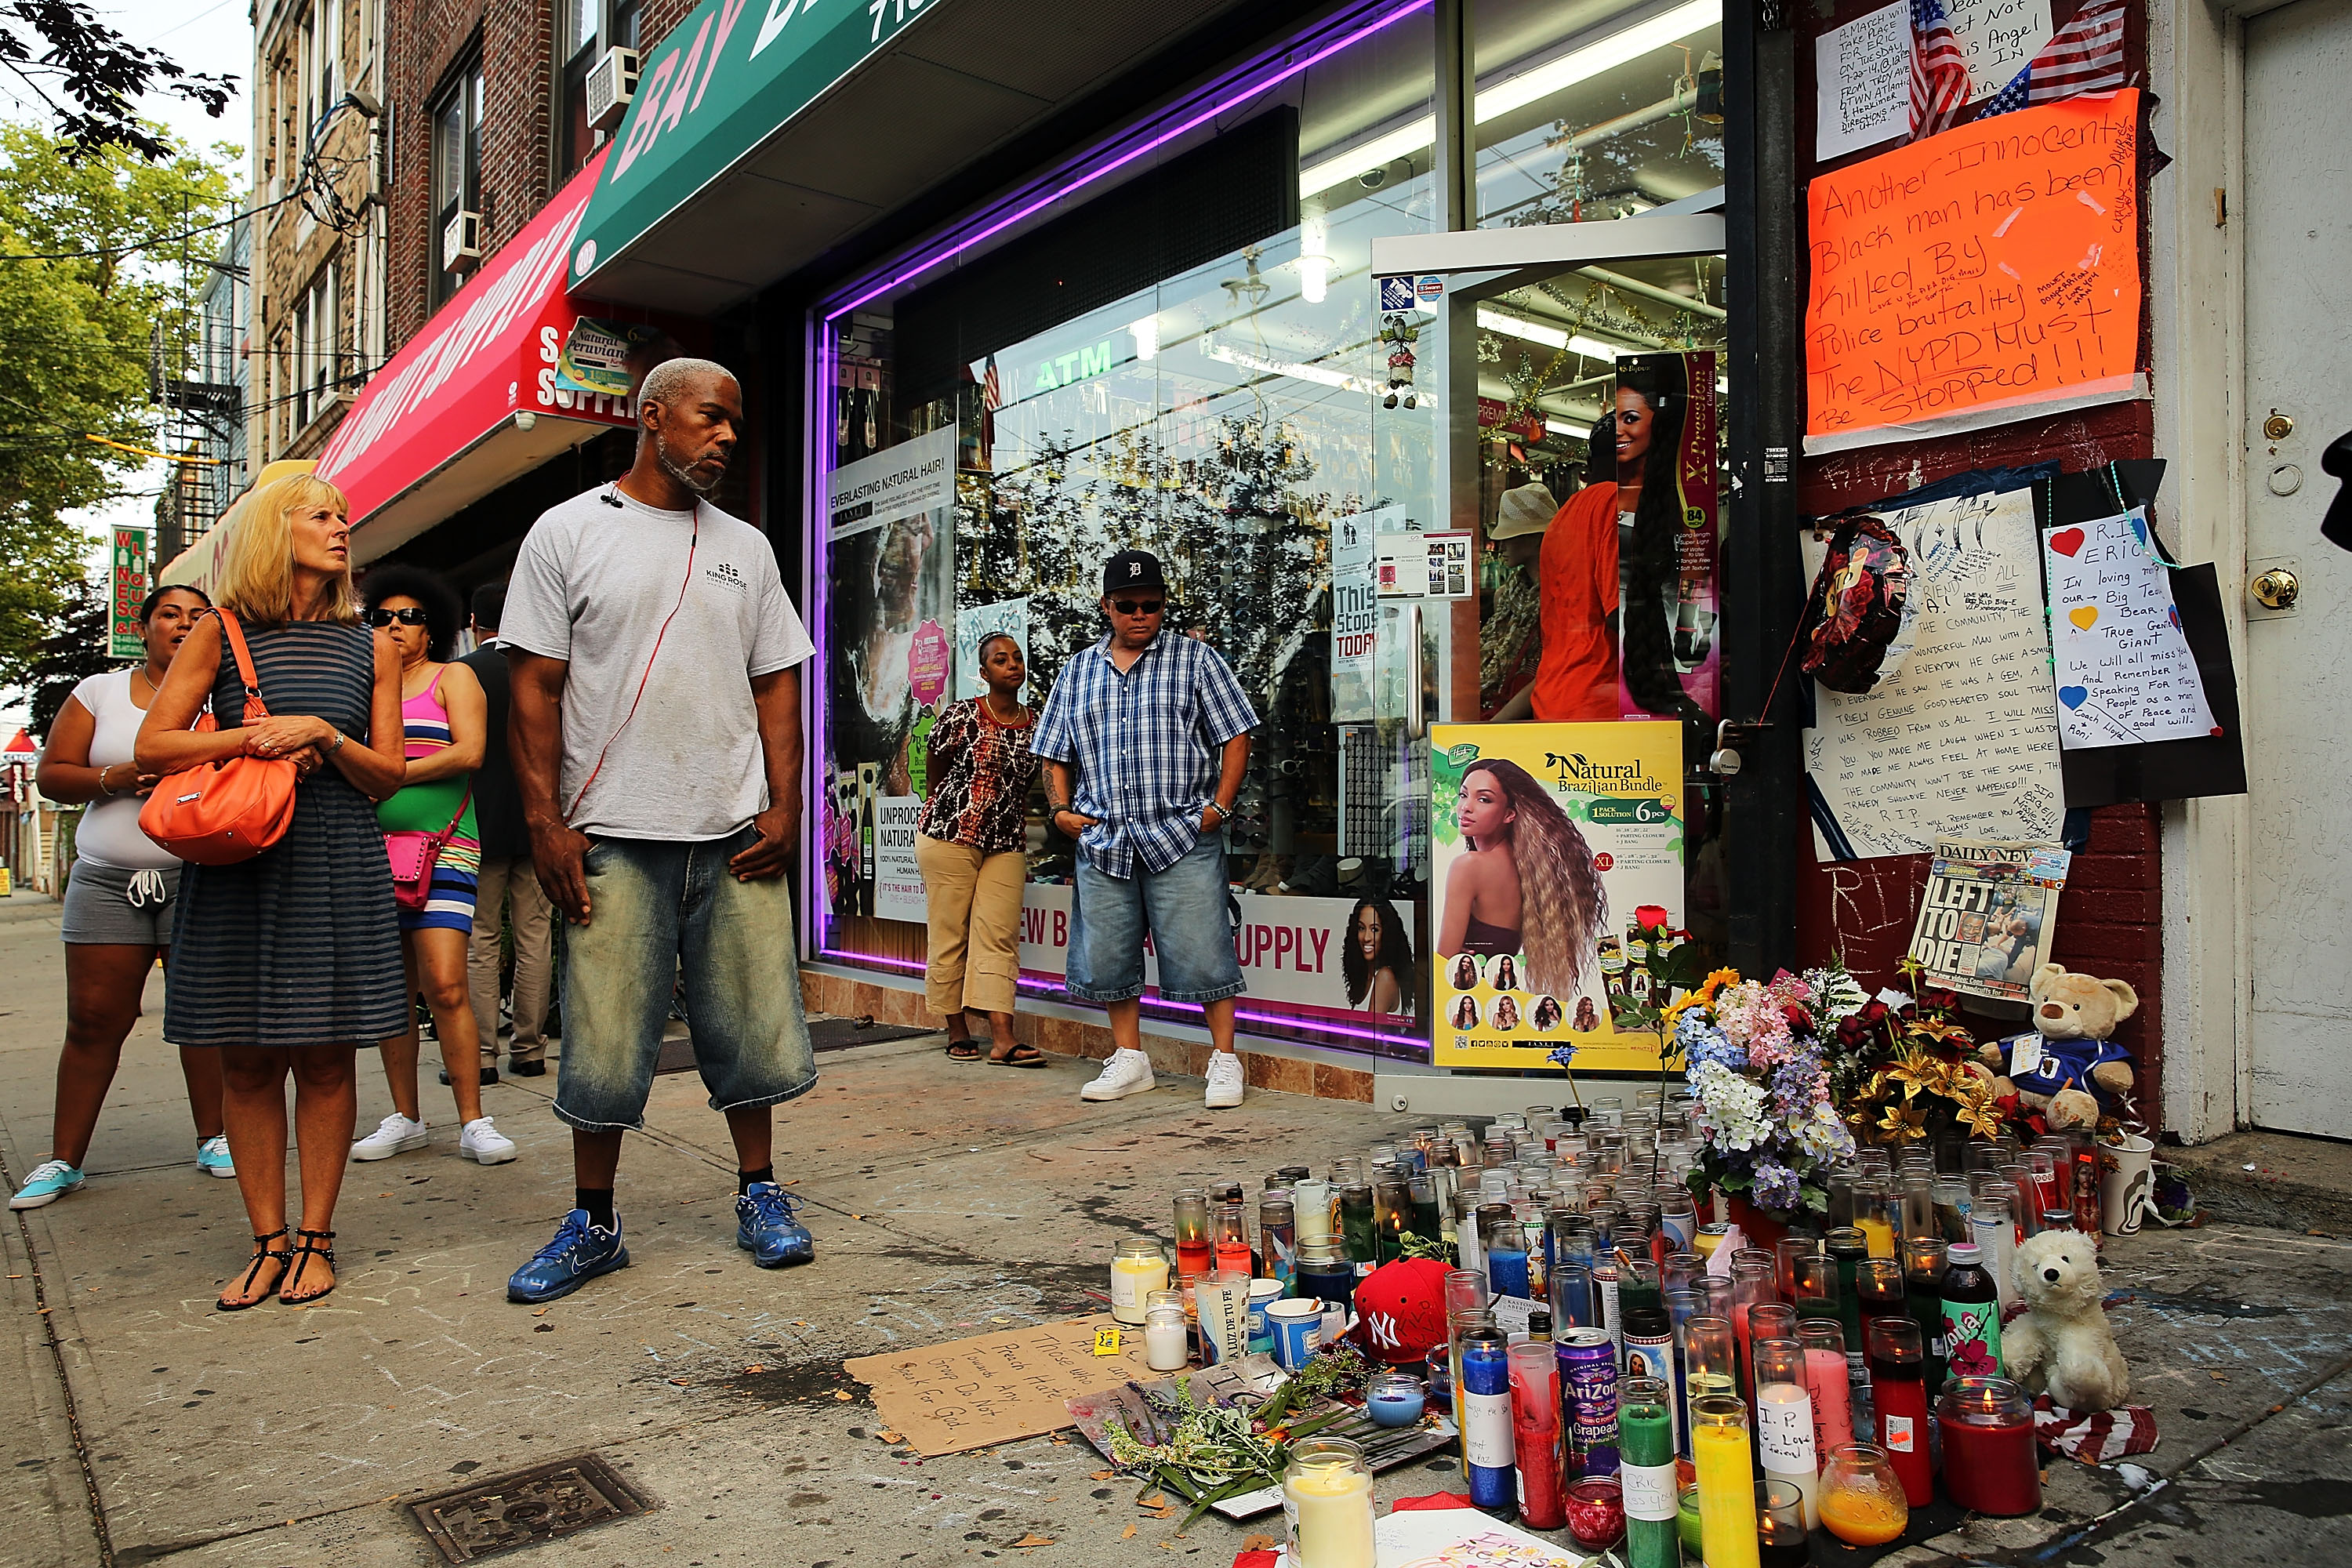 People attend a vigil for Eric Garner near where he died after he was taken into police custody in Staten Island last Thursday on July 22, 2014 in New York City. (Spencer Platt—Getty Images)